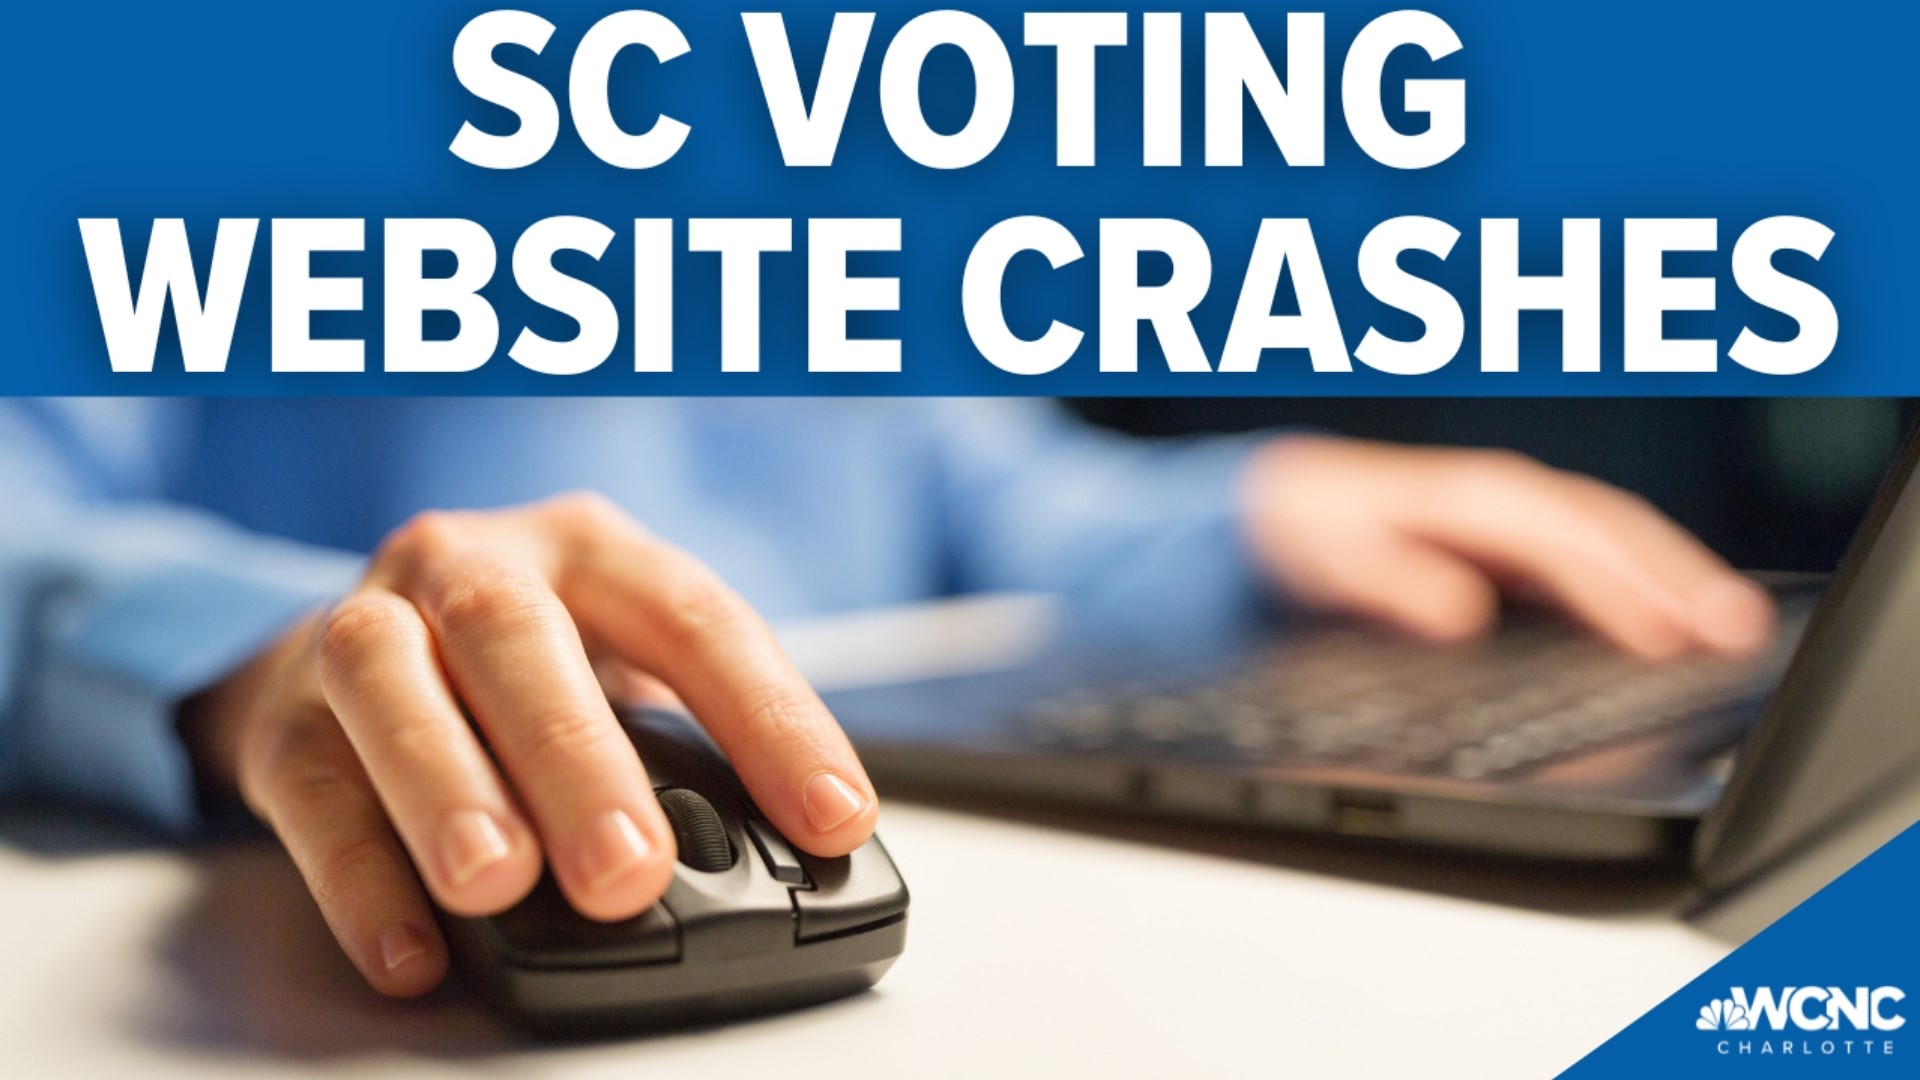 The South Carolina State Election Commission says the website, scvotes.gov, crashed due to so many people trying to access it.